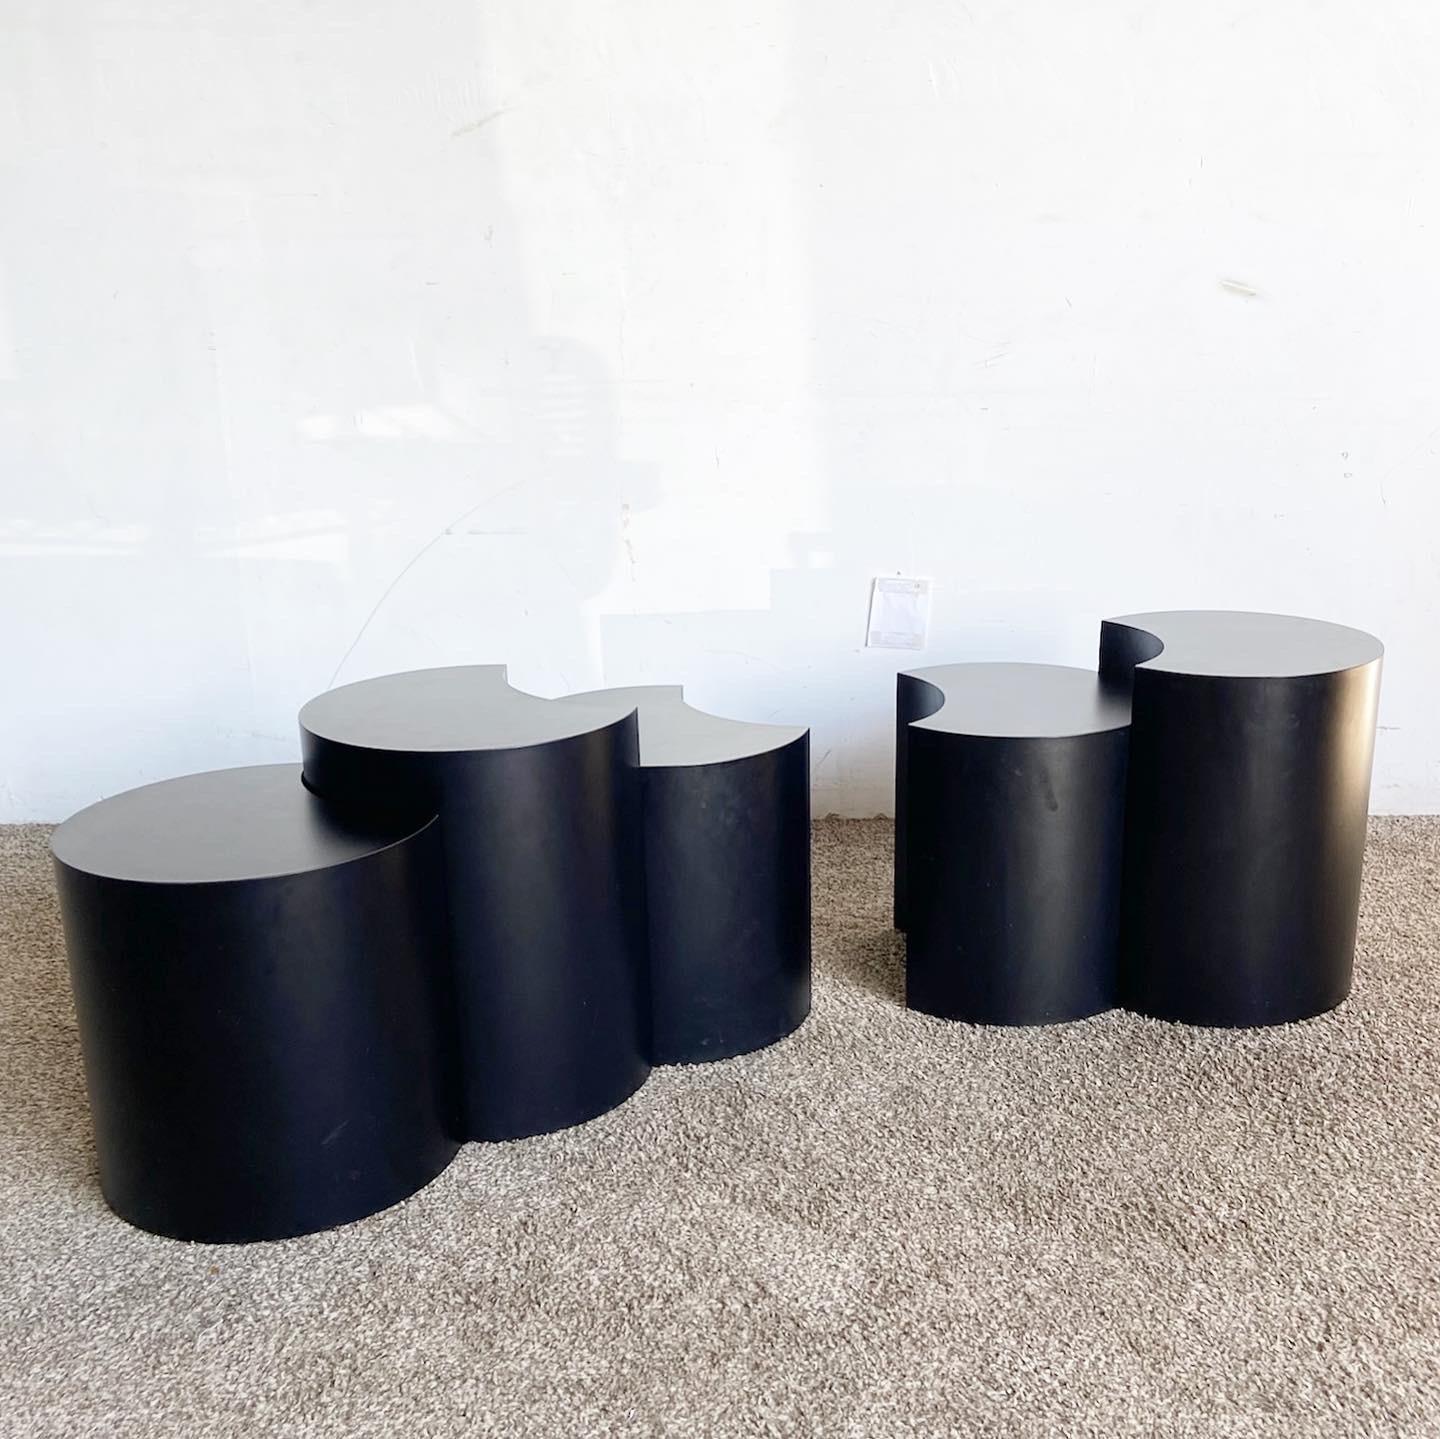 Transform your living space with this set of 5 Postmodern Crescent Black Laminate Nesting Tables. Featuring a modular design and sleek black laminate finish, these tables offer both utility and style, perfect for any modern setting.
Some wear around